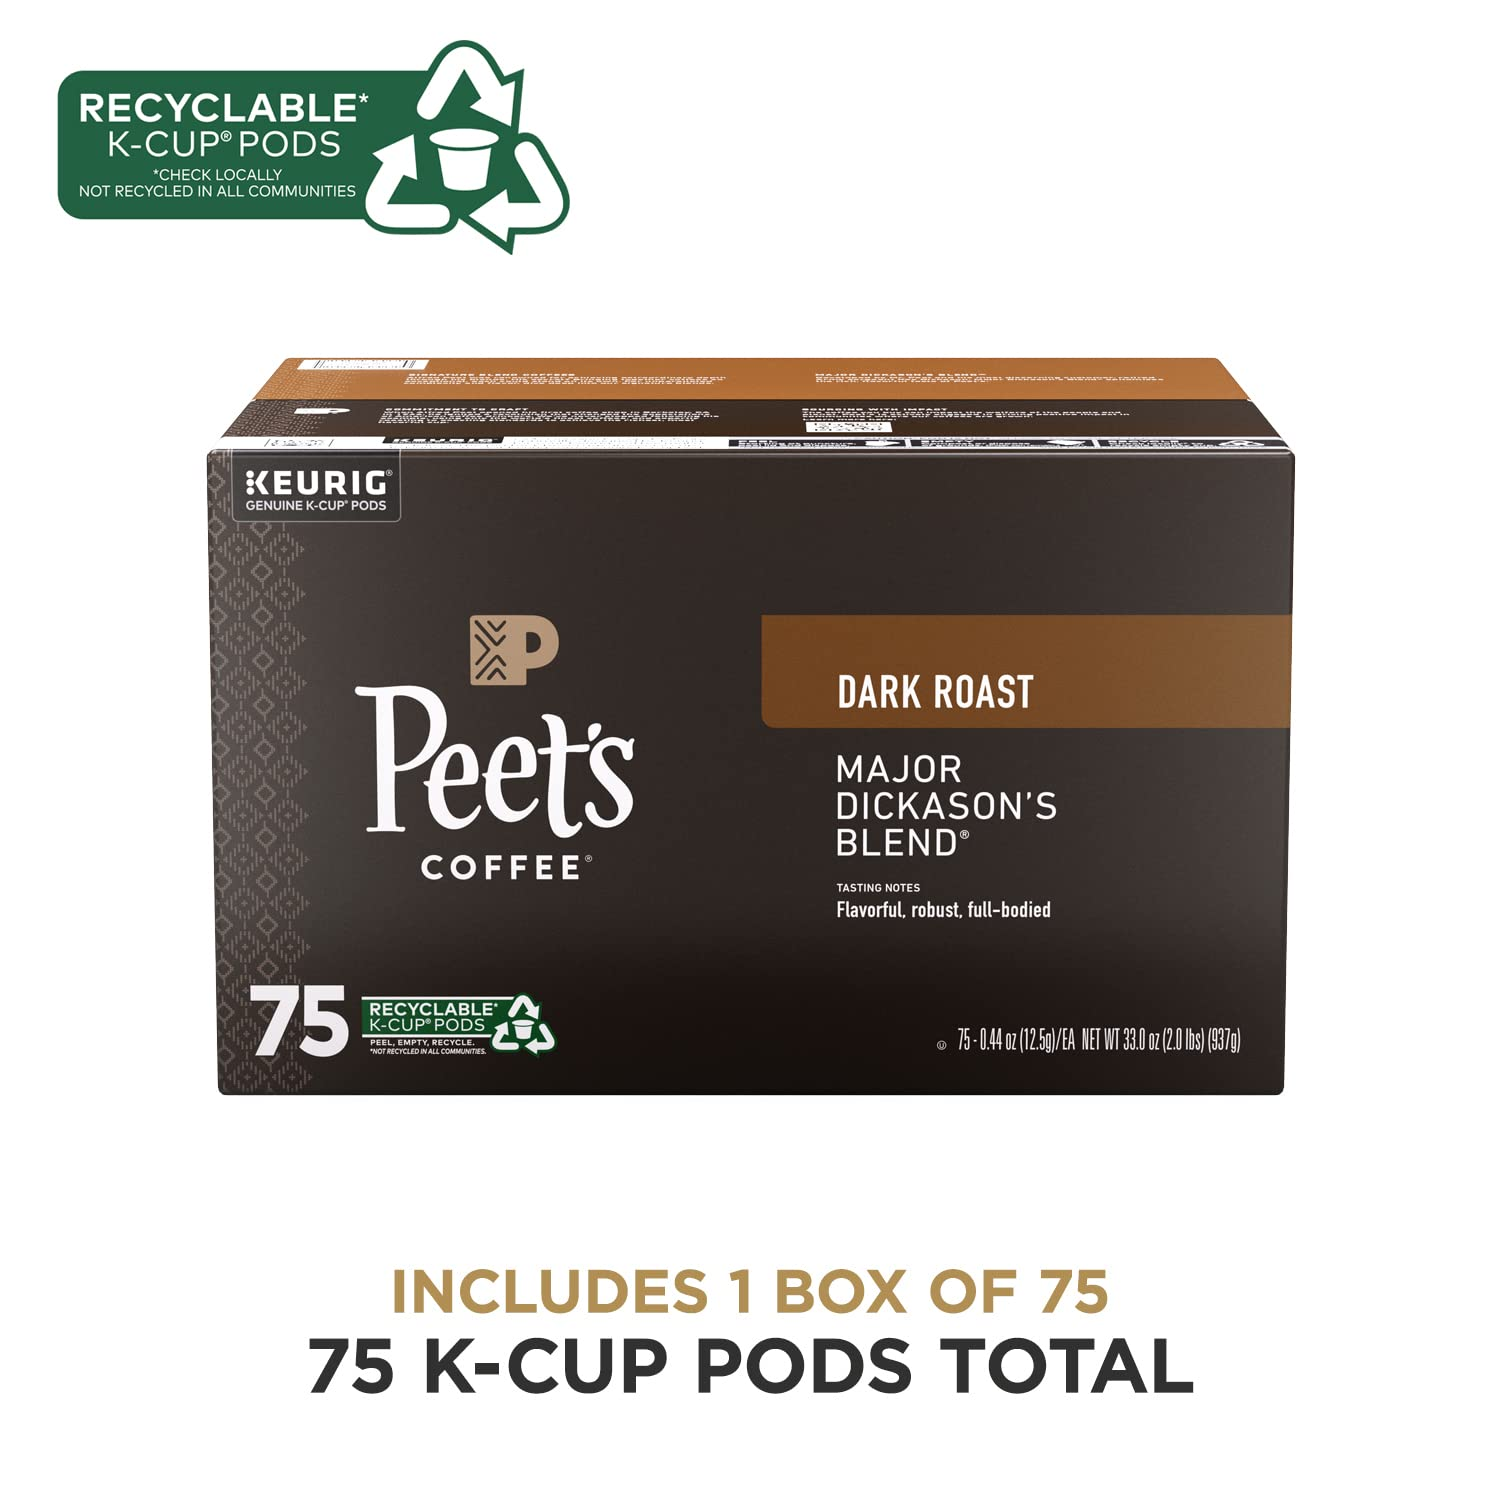 , Dark Roast K-Cup Pods for Keurig Brewers - Major Dickason'S Blend 75 Count (1 Box of 75 K-Cup Pods) Packaging May Vary